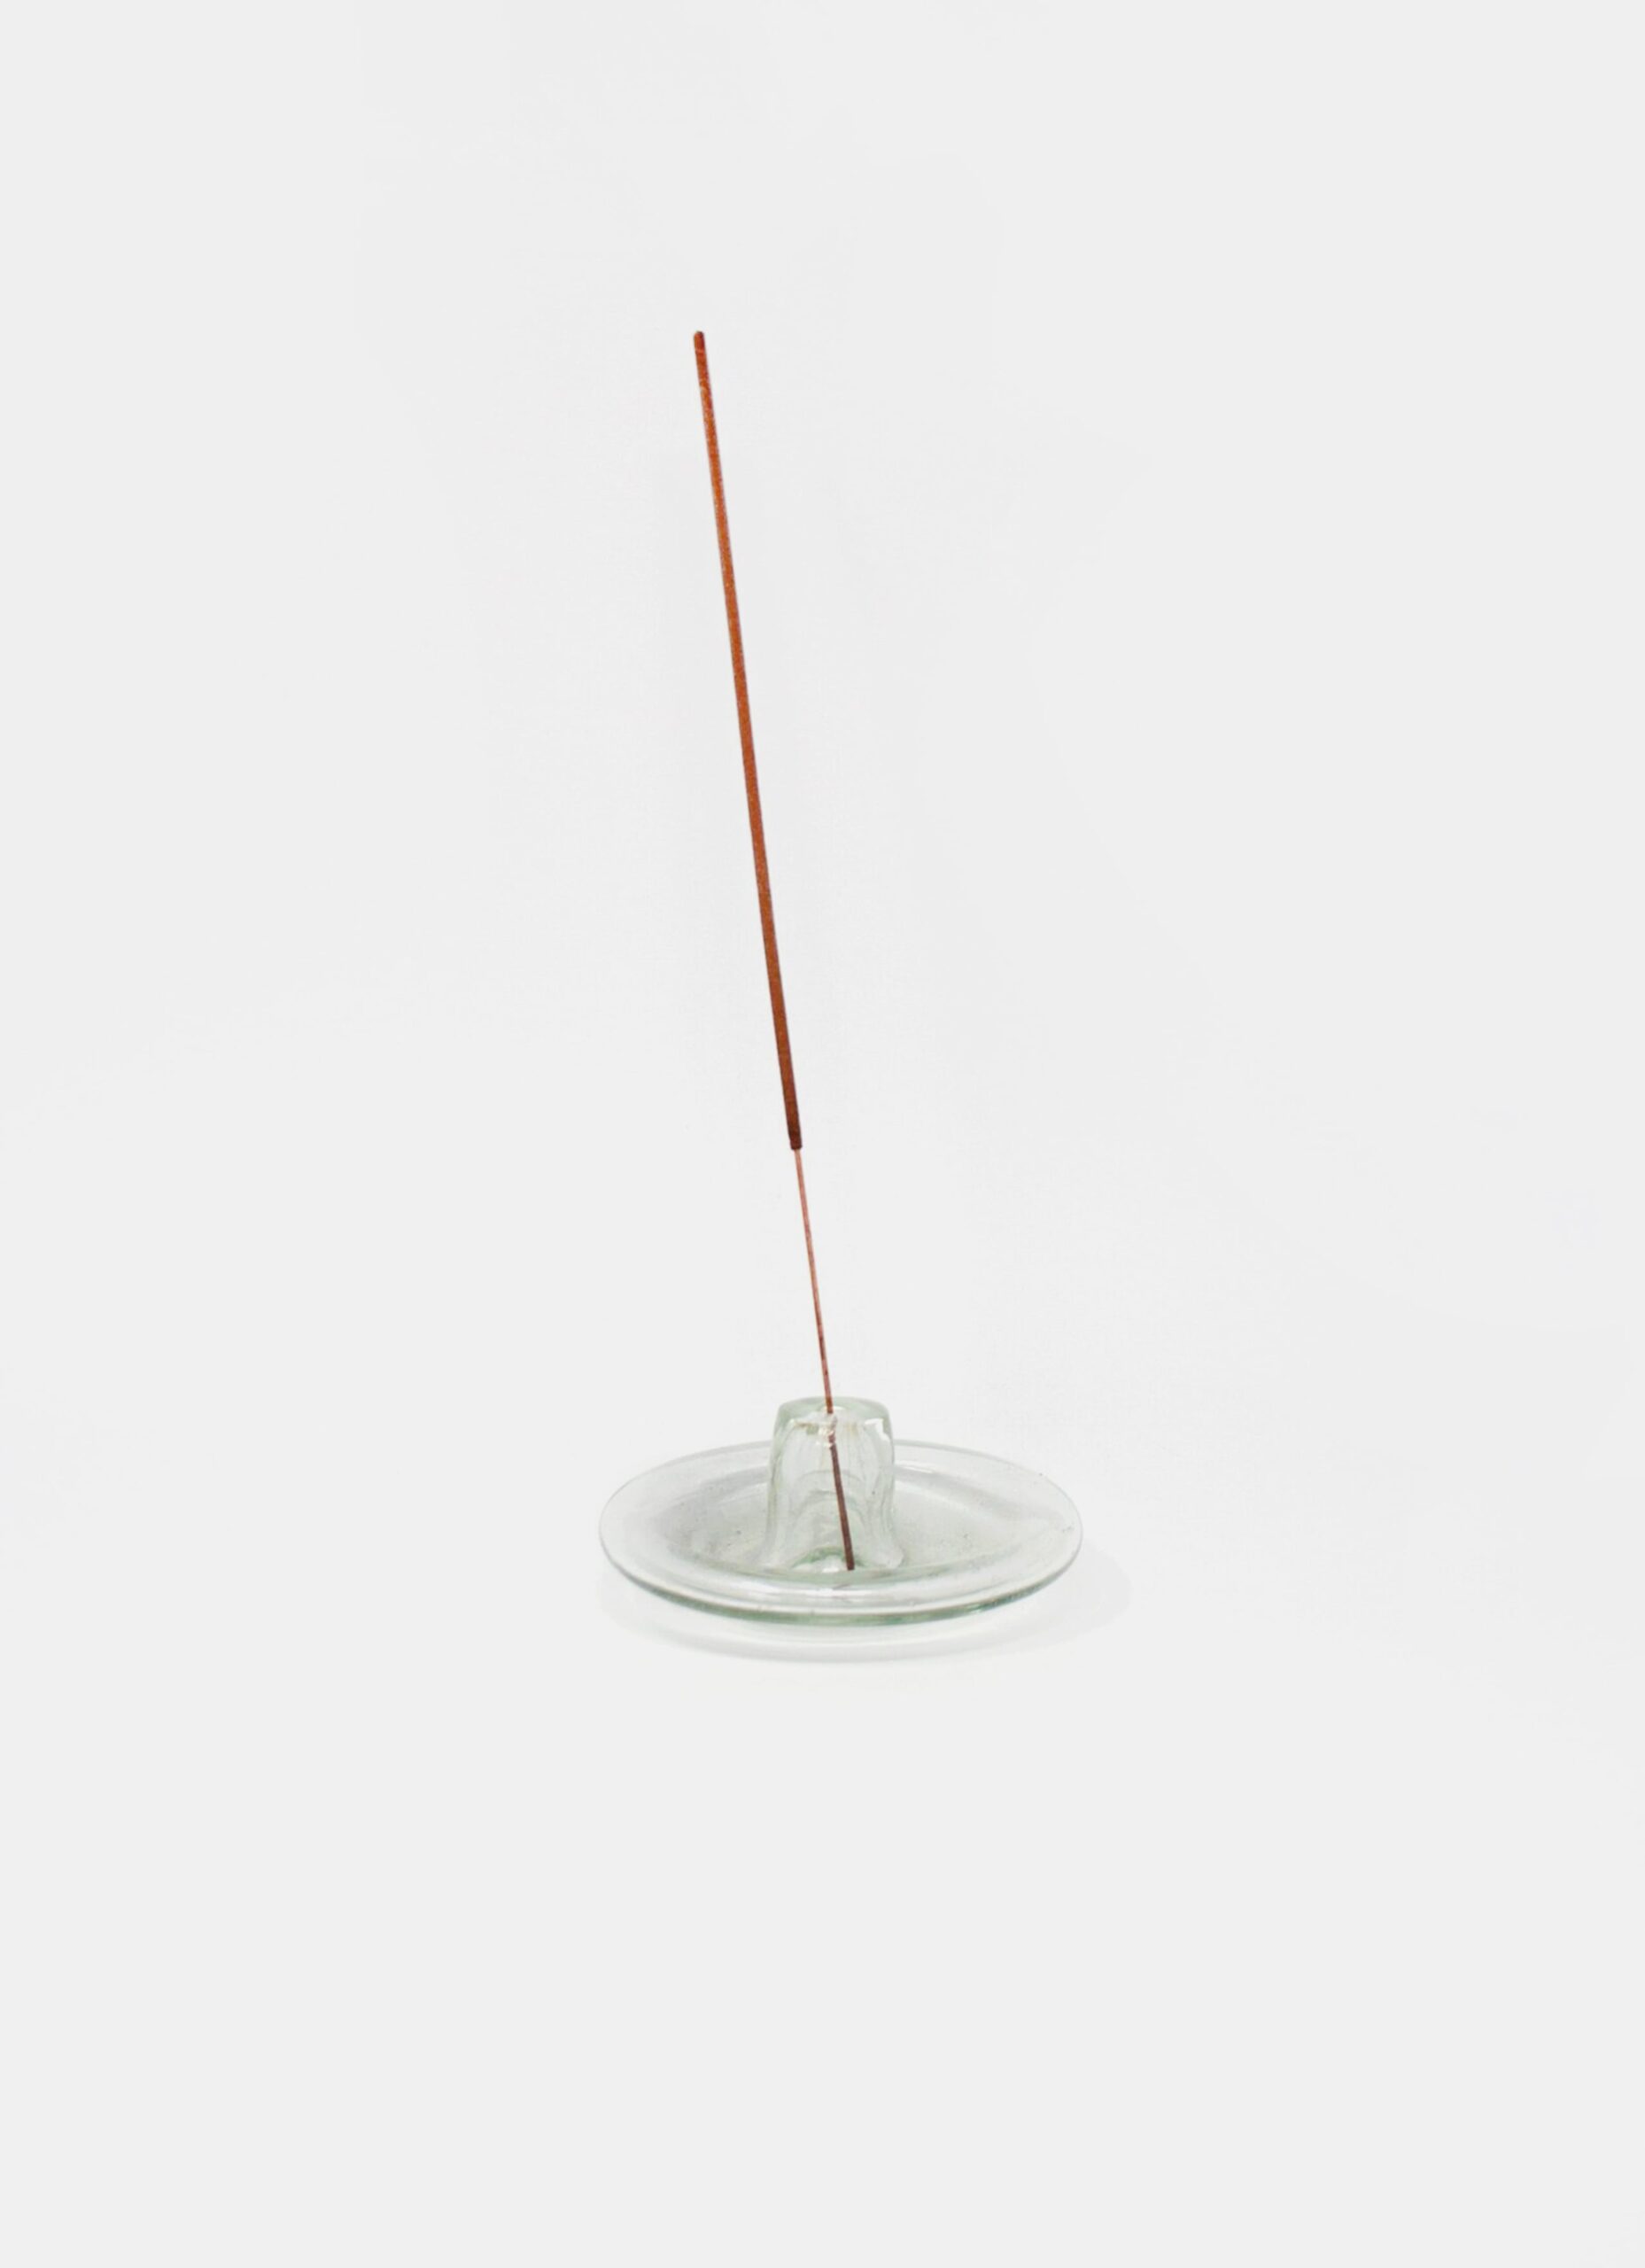 La Soufflerie - Hand-blown Incense Holder - Recycled Glass - Transparent